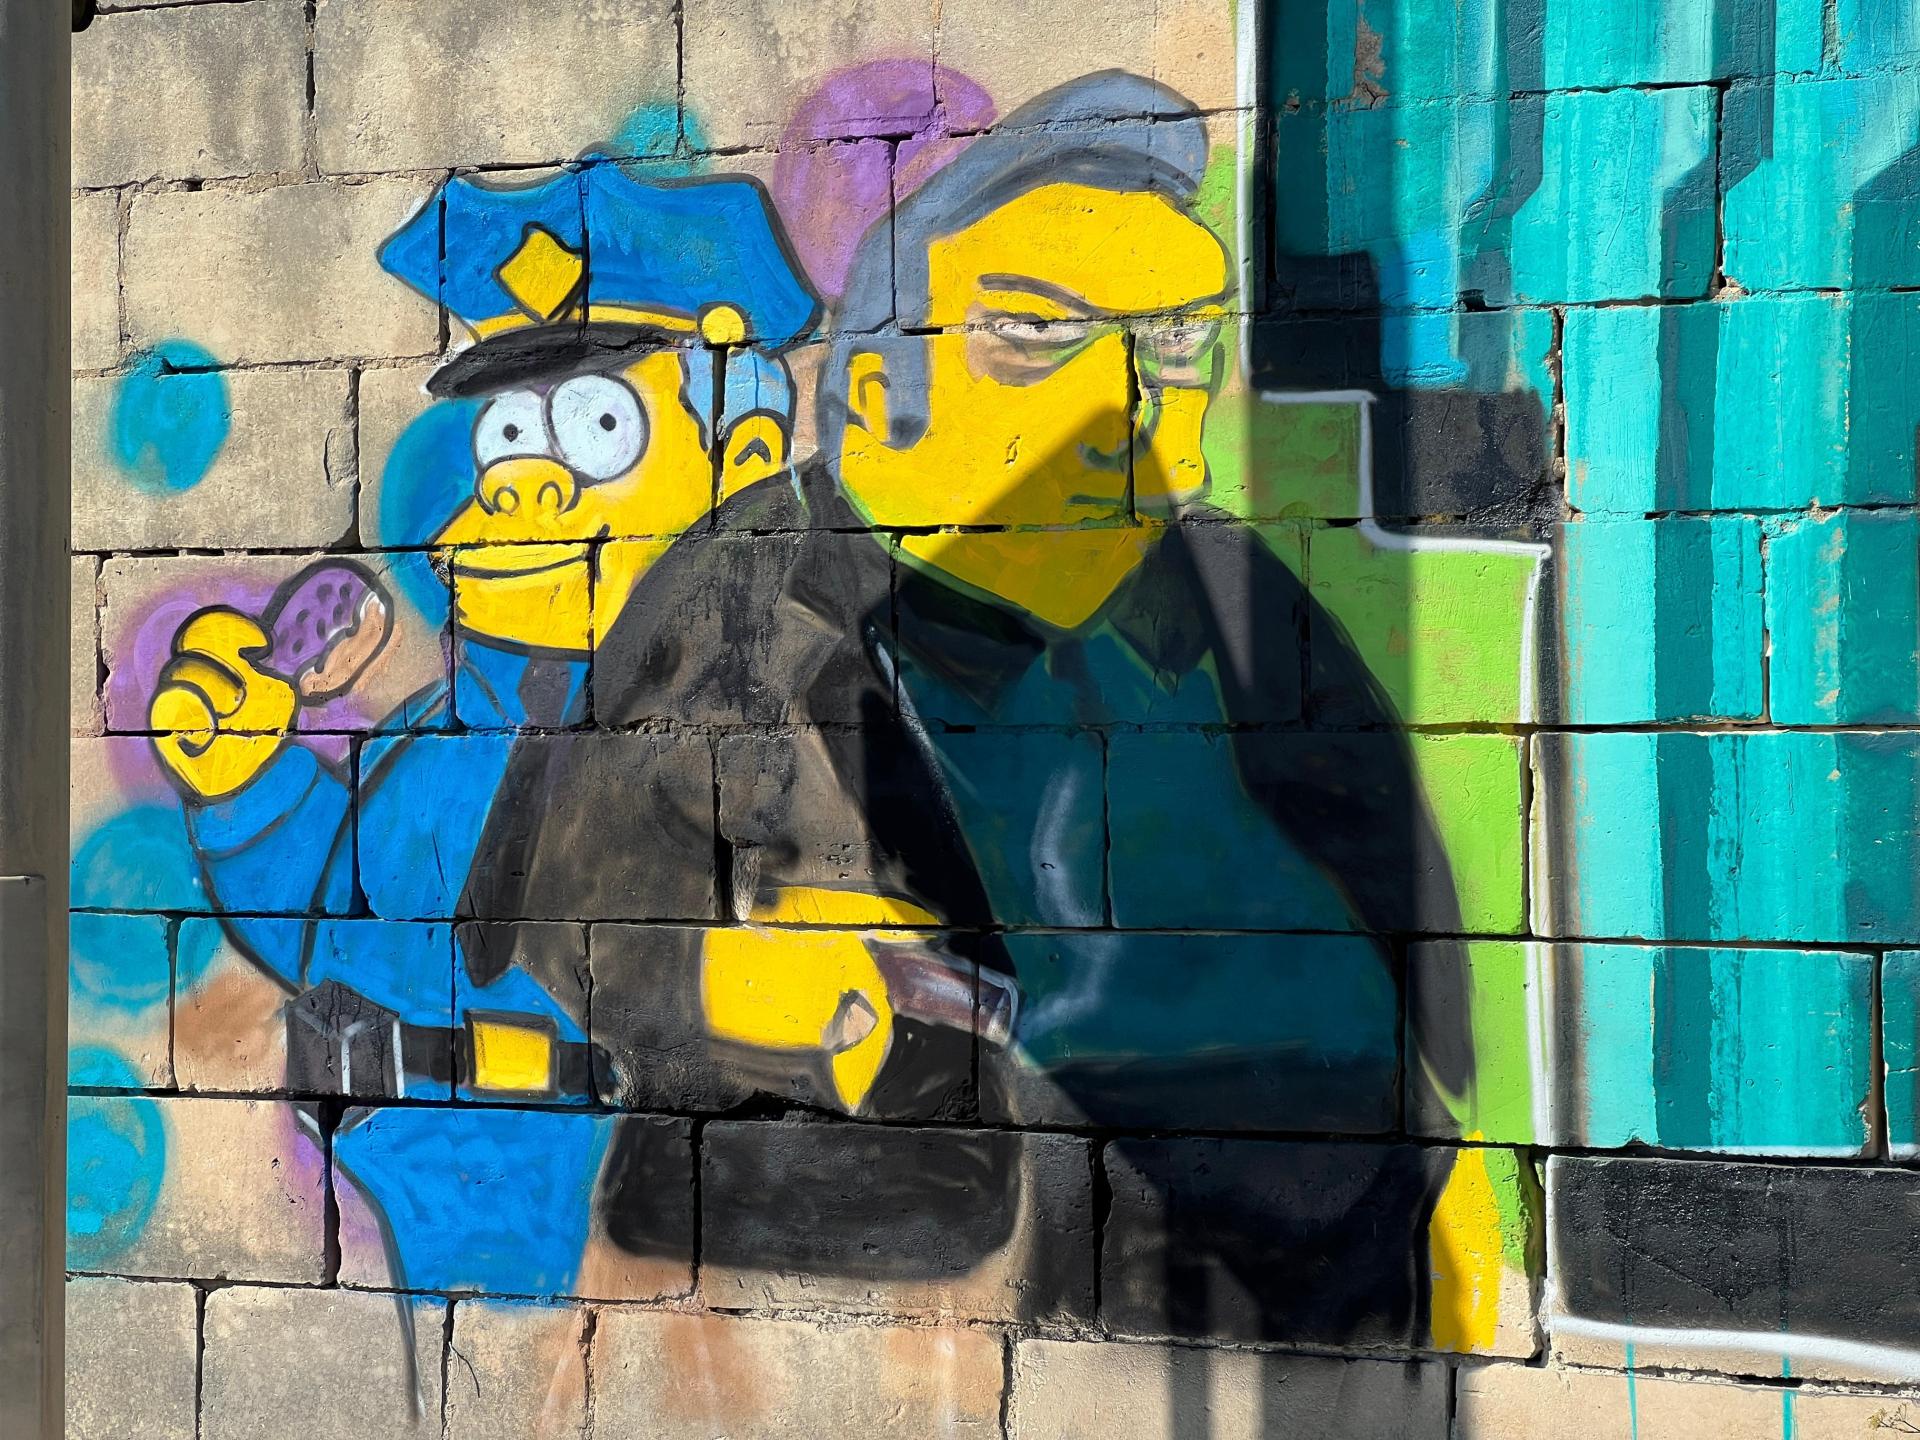 Uncaring police officers and the looming shadow of organised crime also appear to be depicted in the graffiti. Photo: Chris Sant Fournier